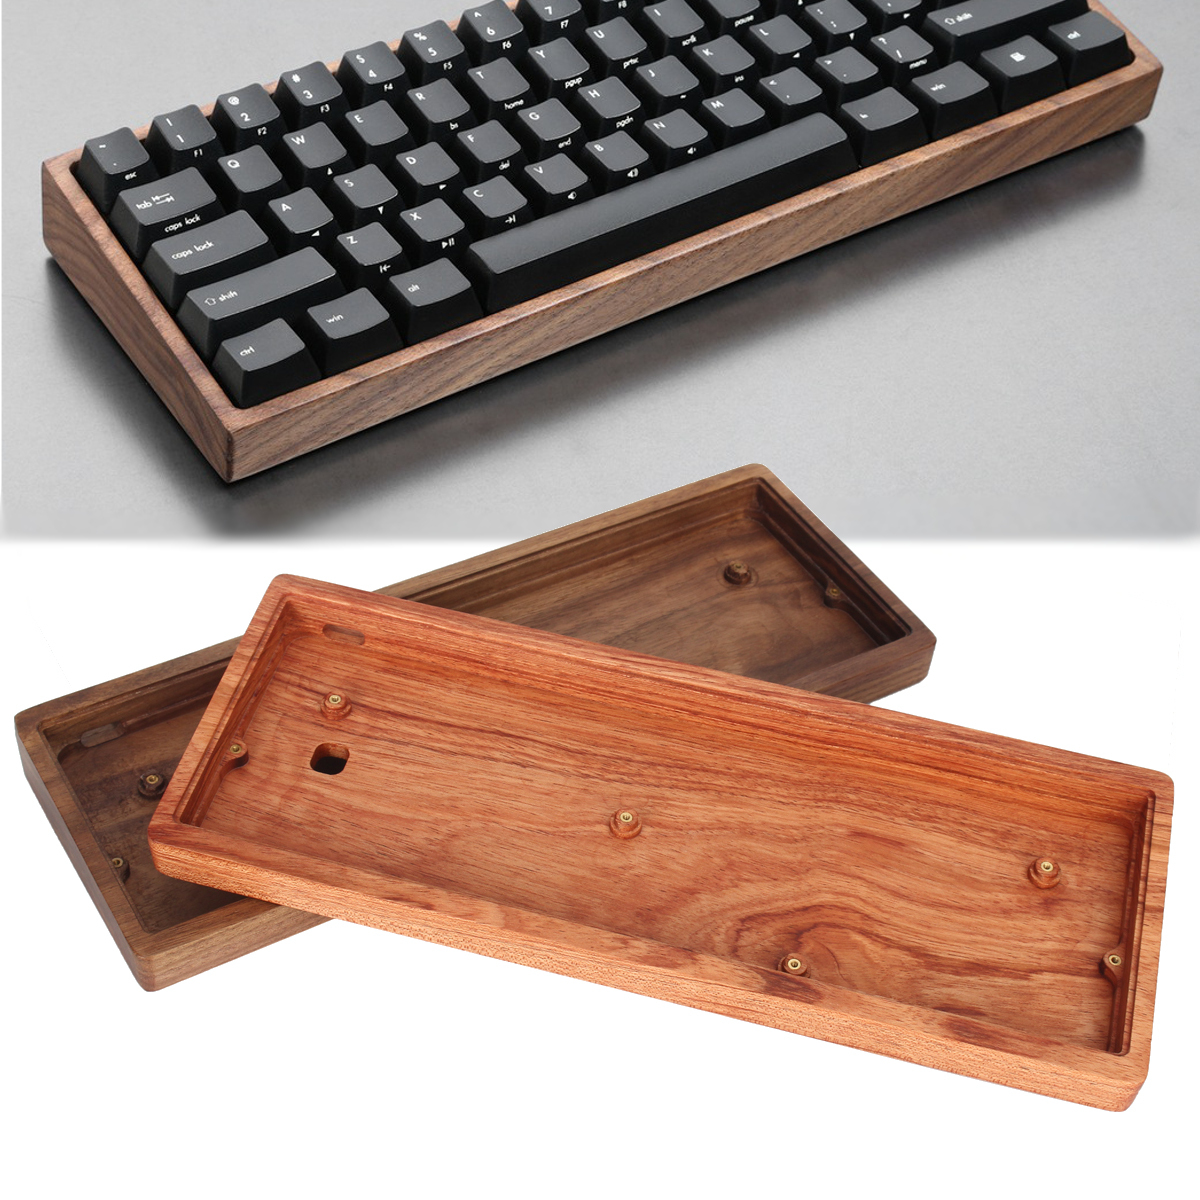 GH60 Solid Wooden Case Customized Shell Base for 60% Mini Mechanical Gaming Keyboard 1